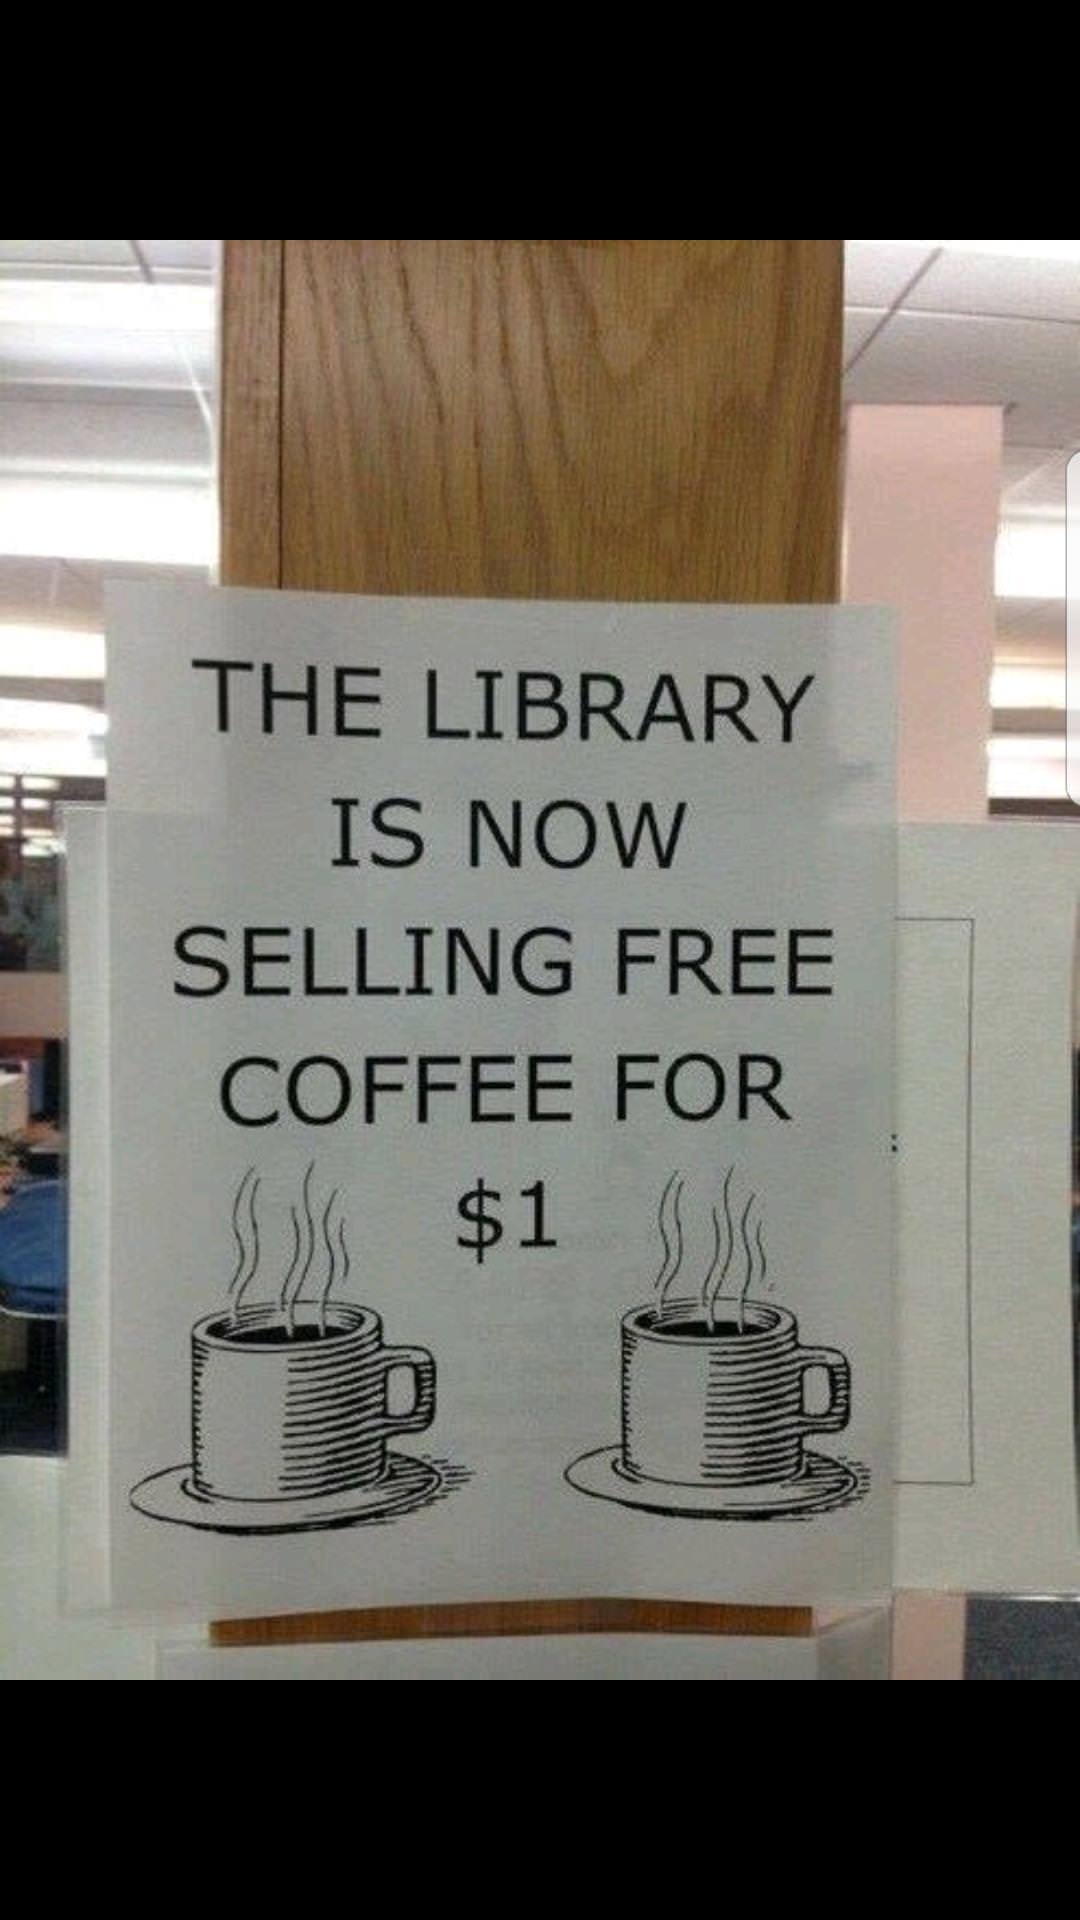 free coffee for 1 dollar - The Library Is Now Selling Free Coffee For $1